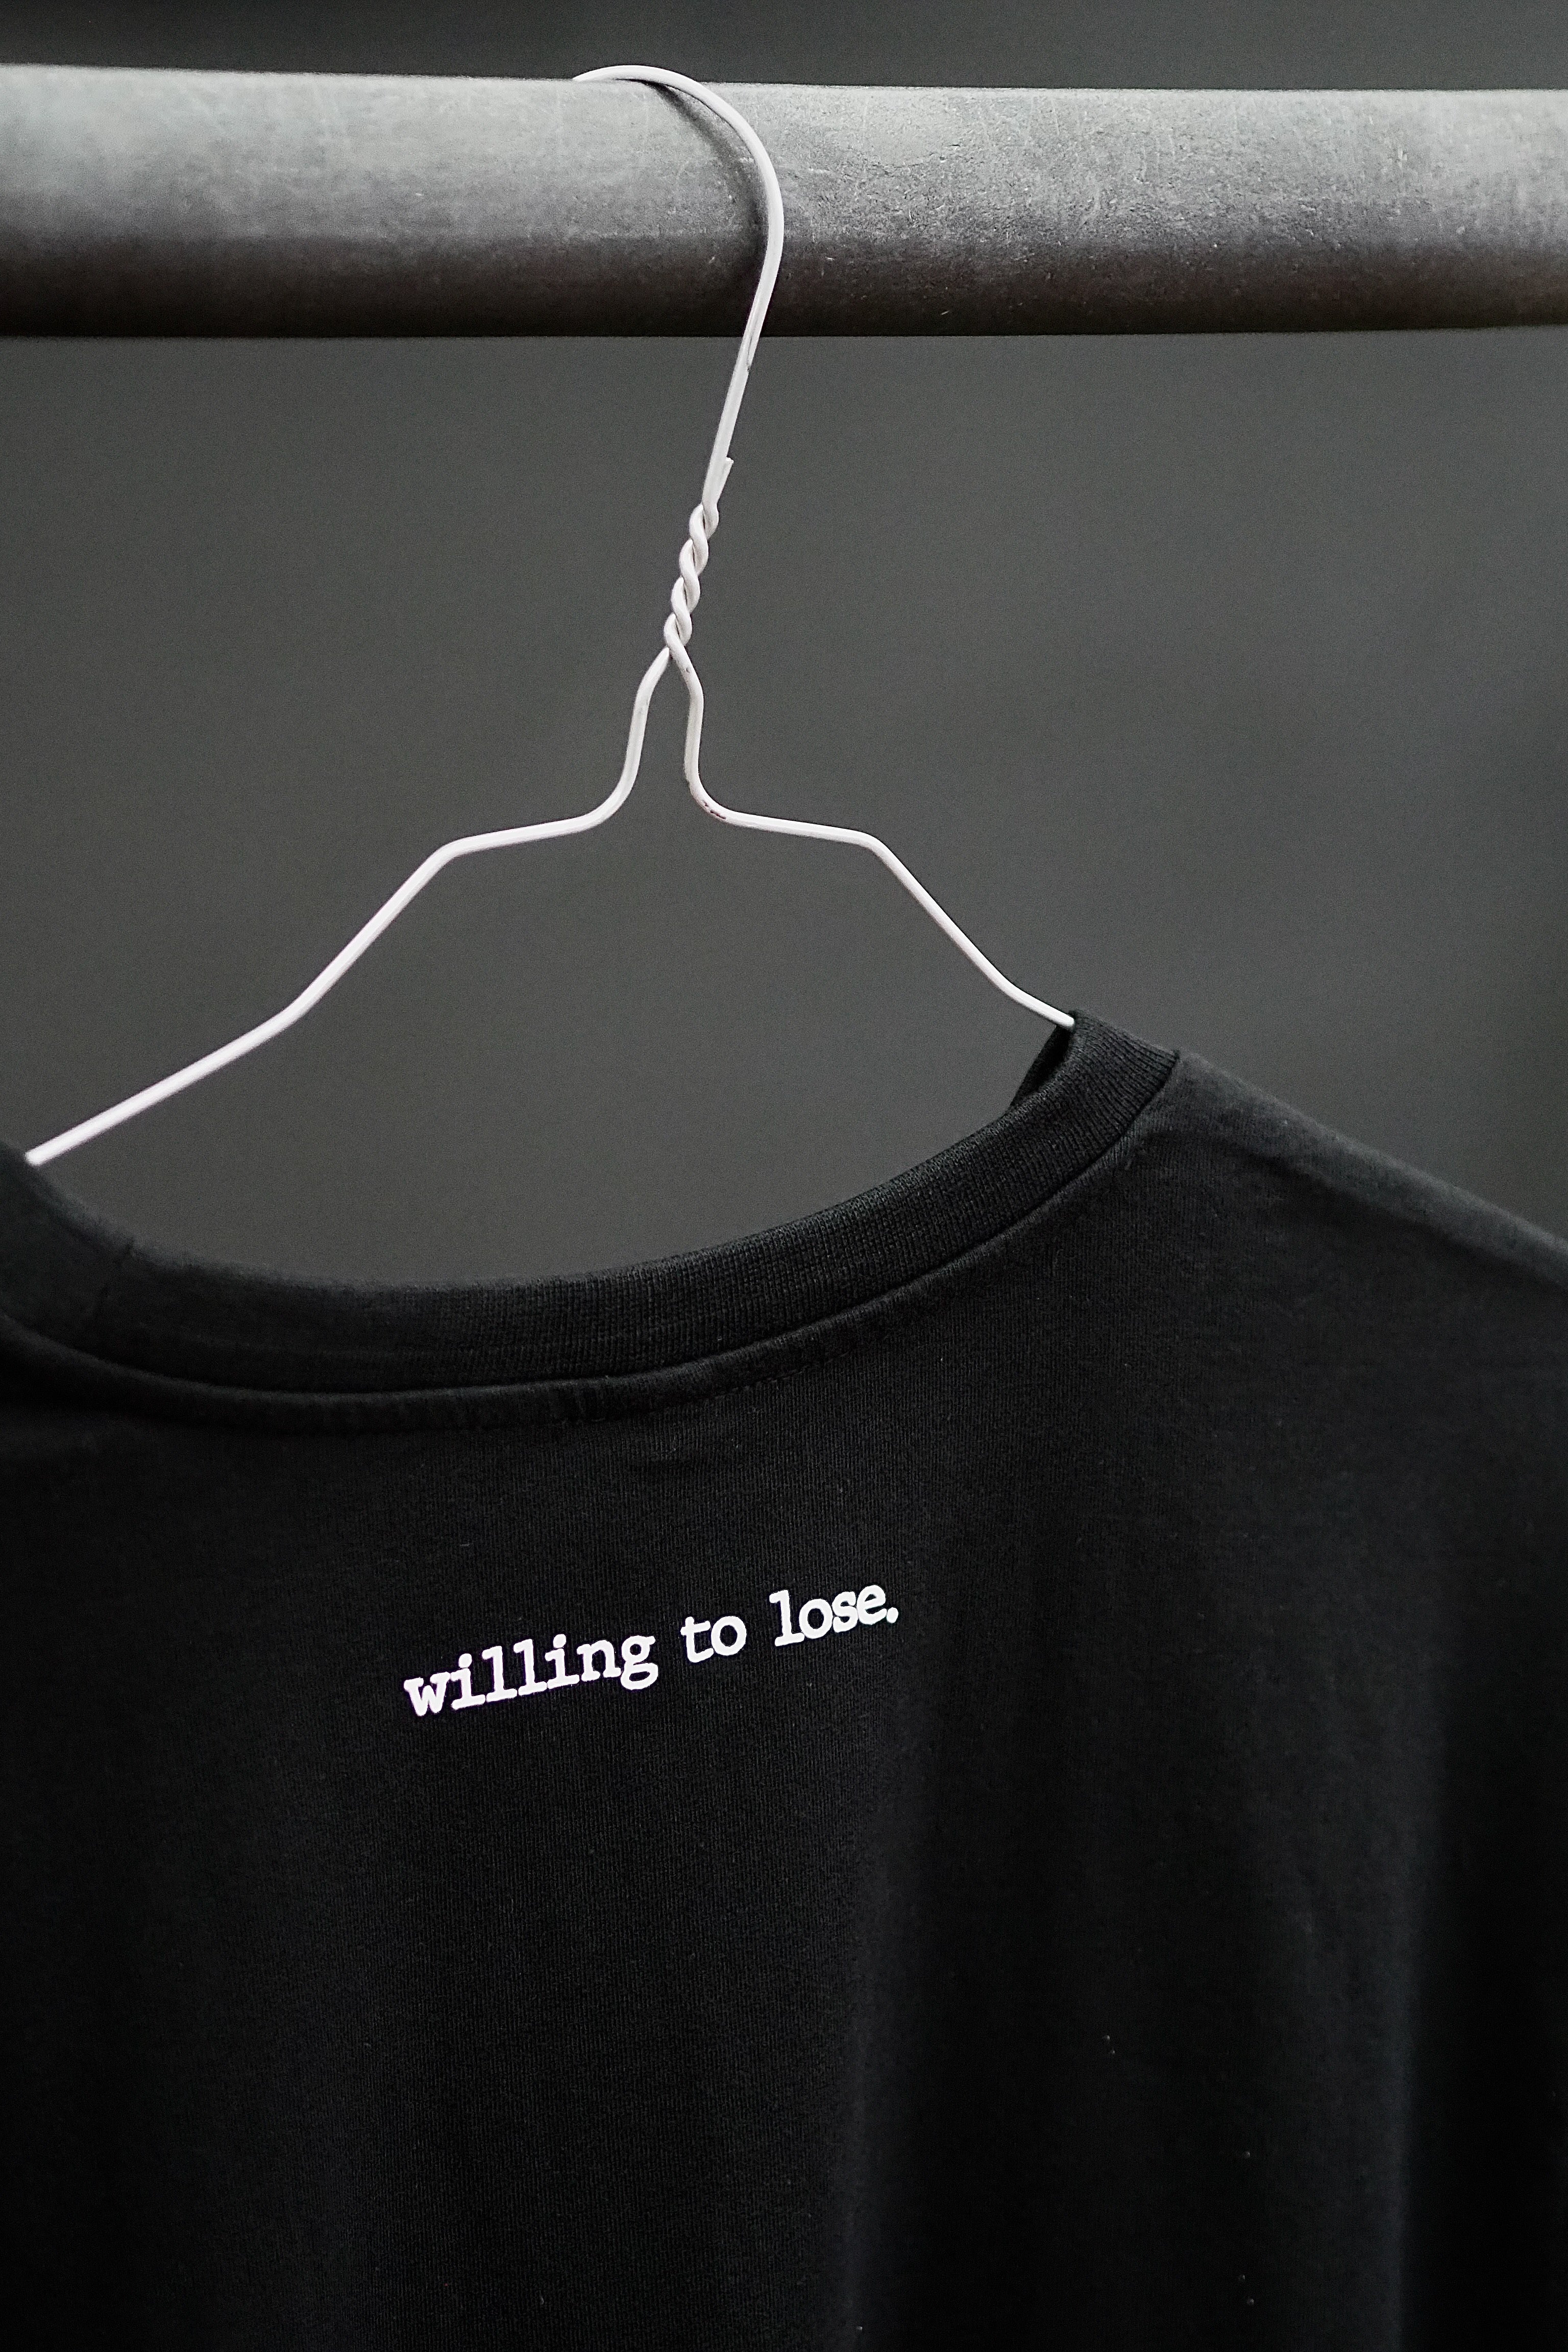 Longsleeve "willing to lose."